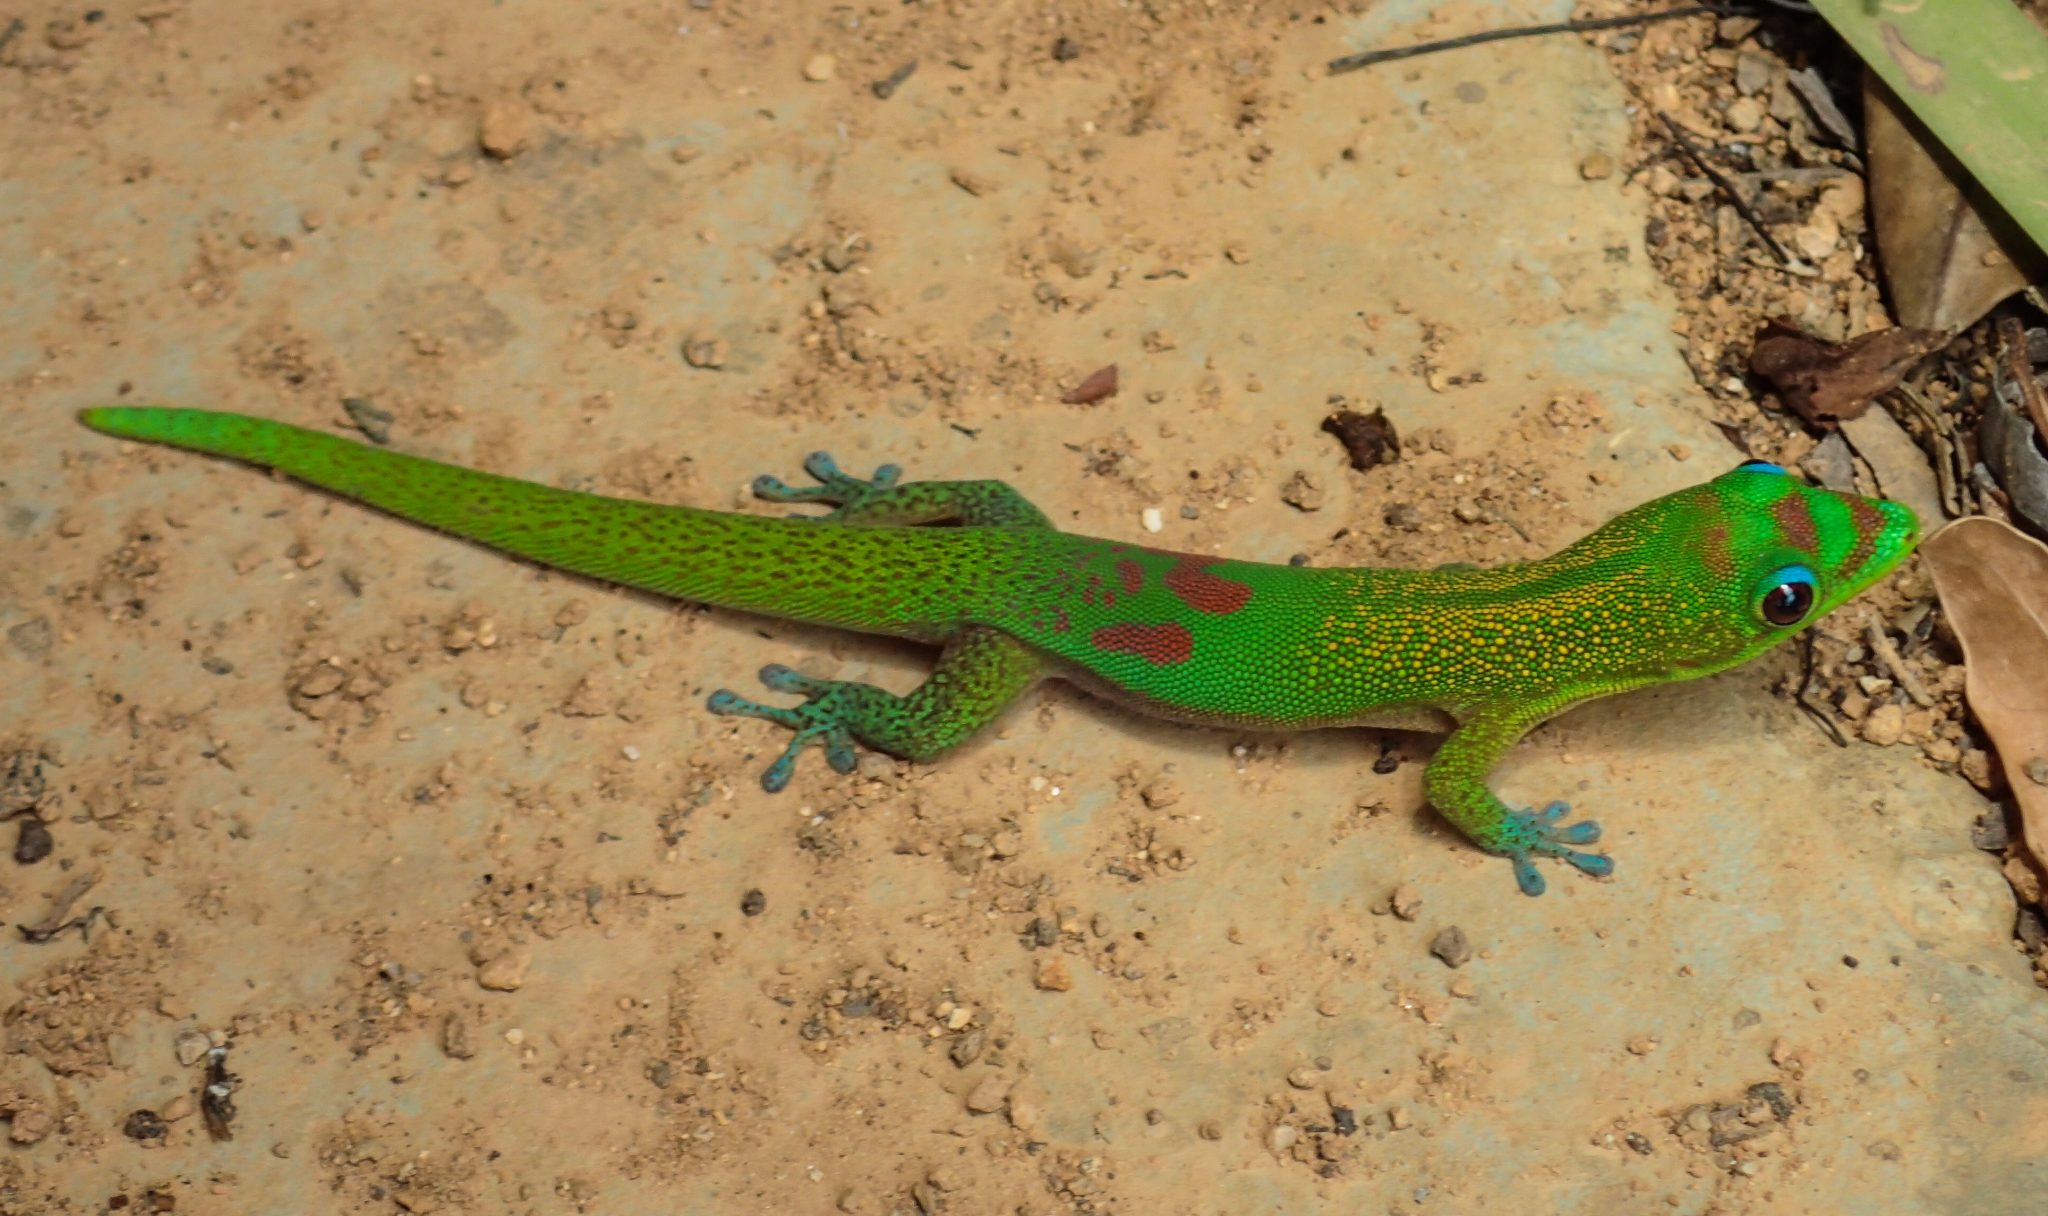 Madagascar Research and Conservation Institute Staff Publish Herpetology Article